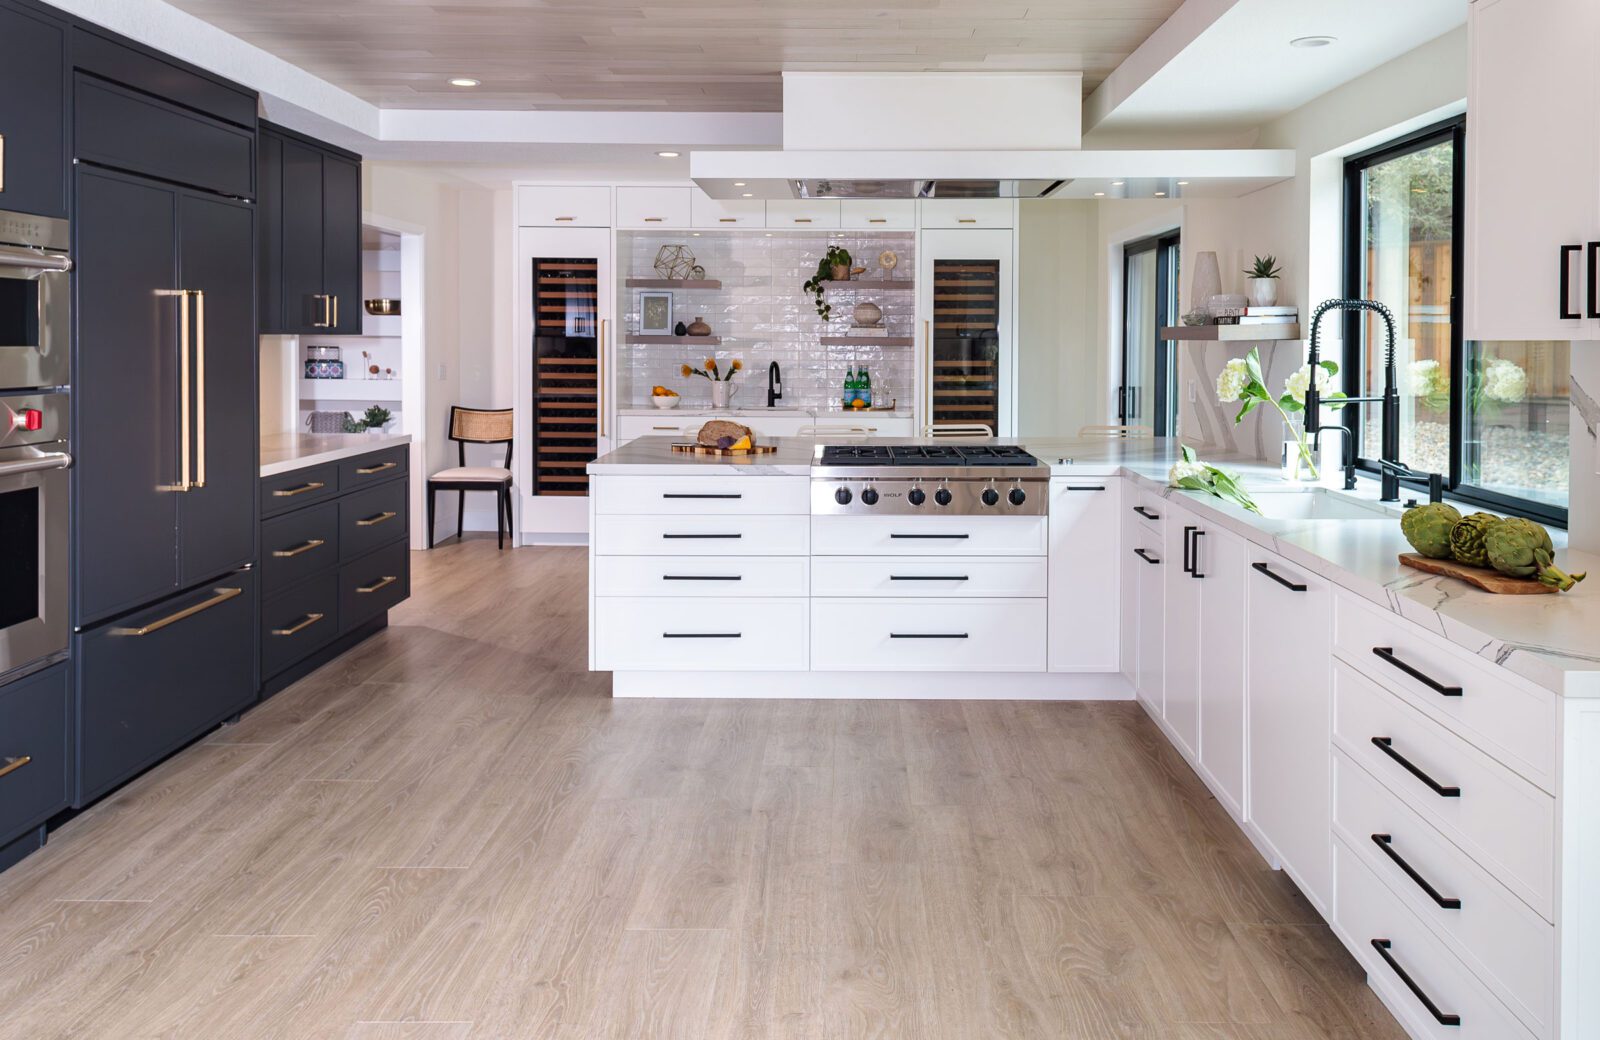 Lovely two toned kitchen with black cabinets and white cabinets, gold cabinetry hardware and matte black cabinetry hardware.